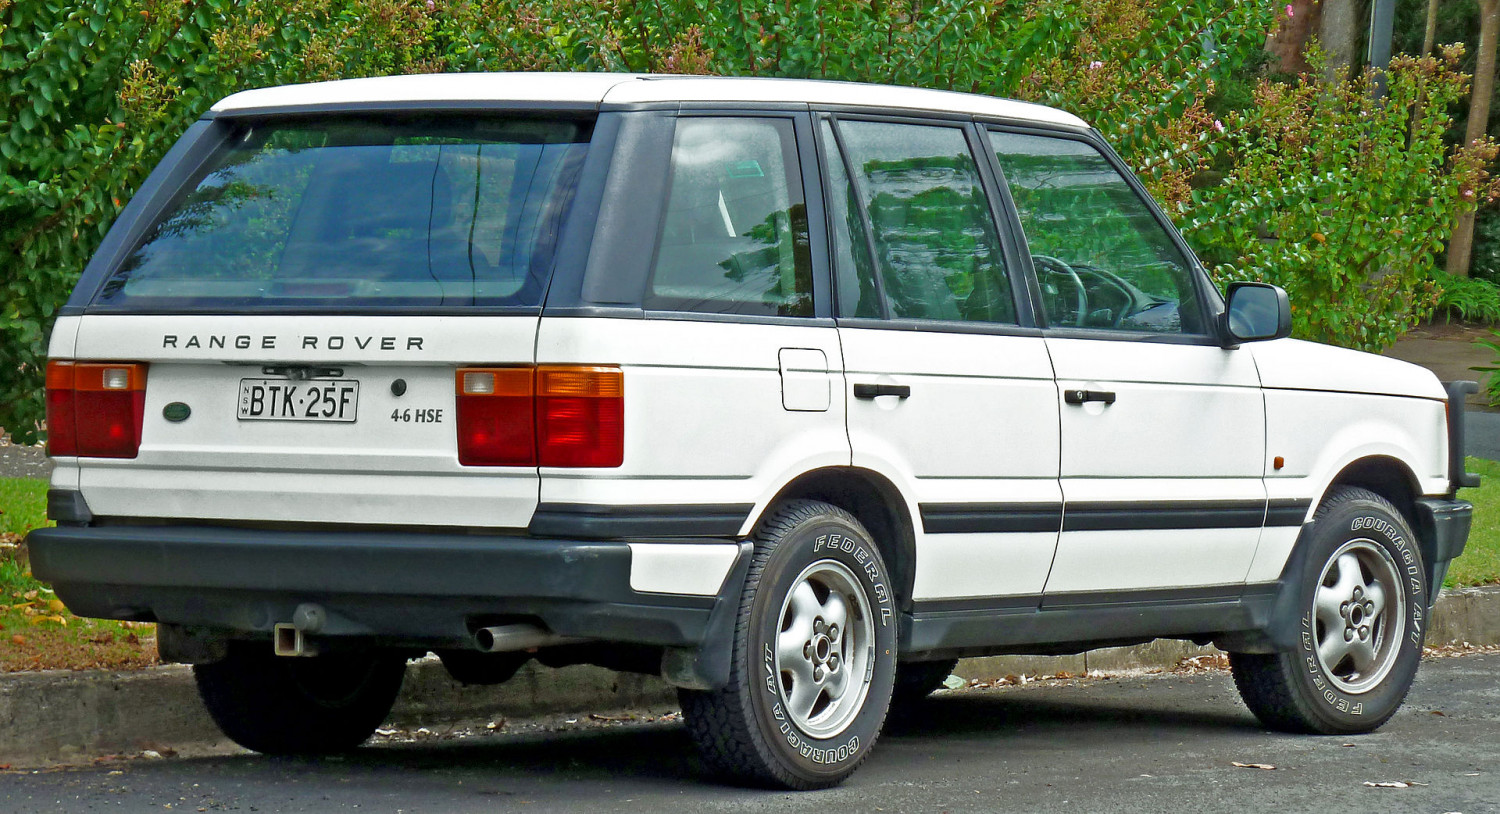 Example of a Range Rover 2